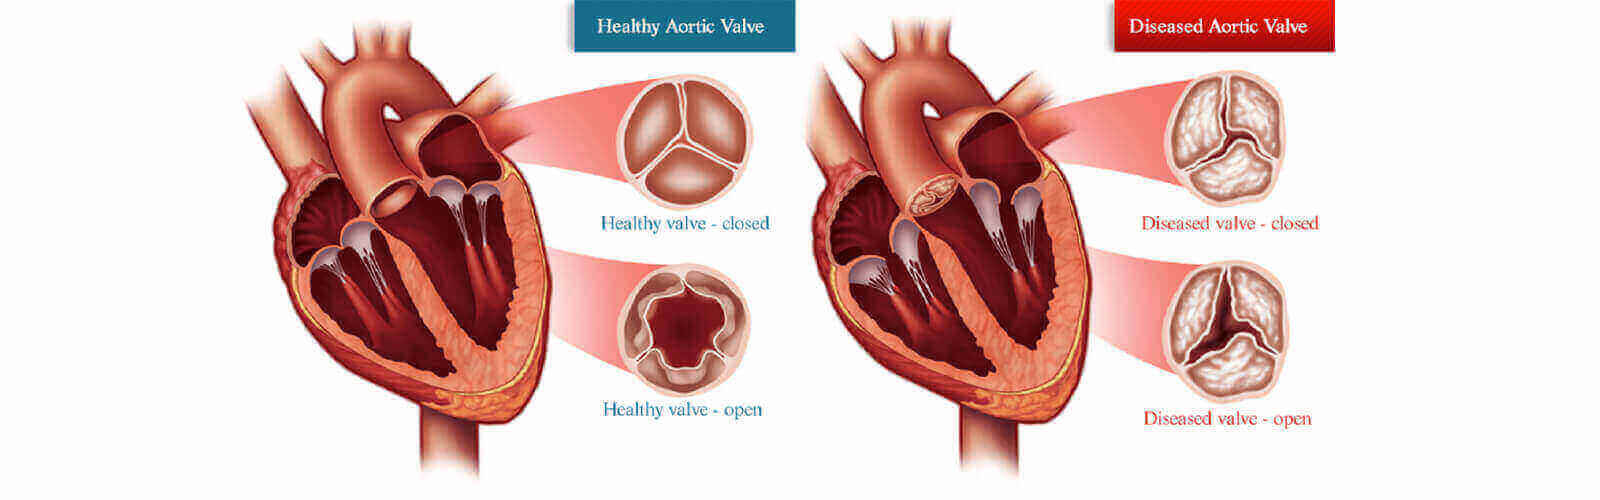 Heart Valve Replacement Surgery in Uae